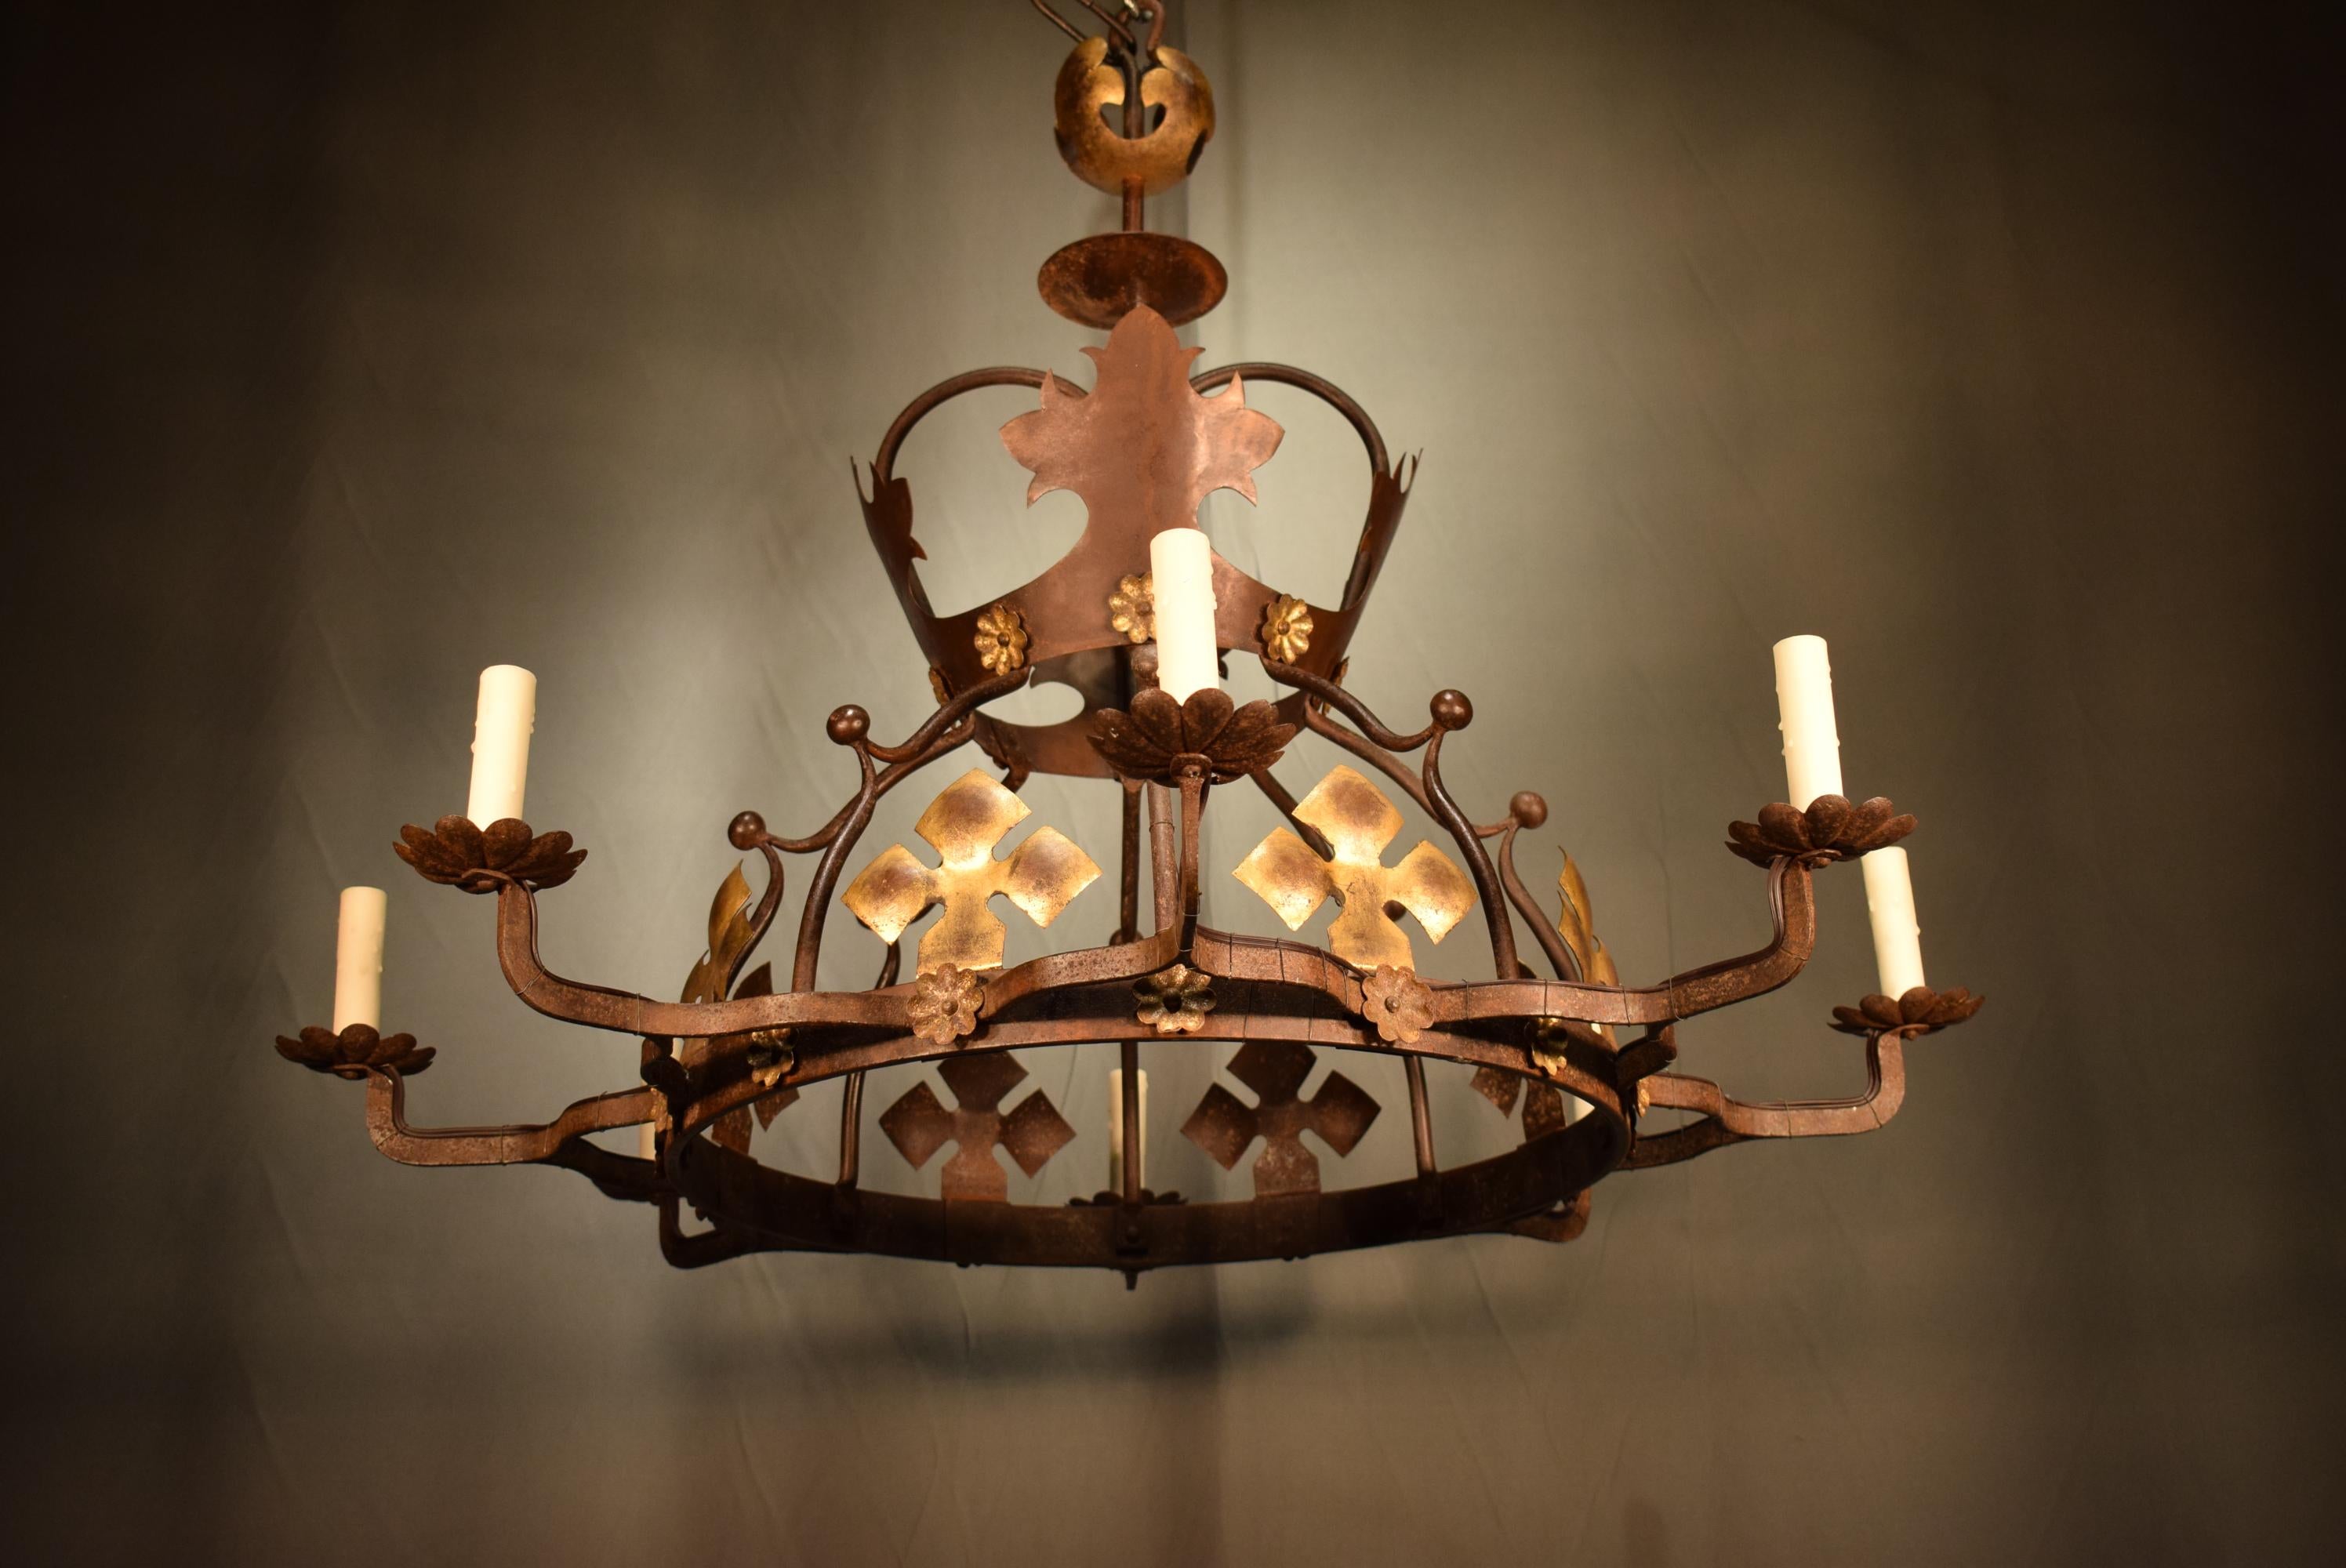 A fine Tudor style iron chandelier, France, circa 1940
8 lights. A pair available
Dimensions: Height 31.5